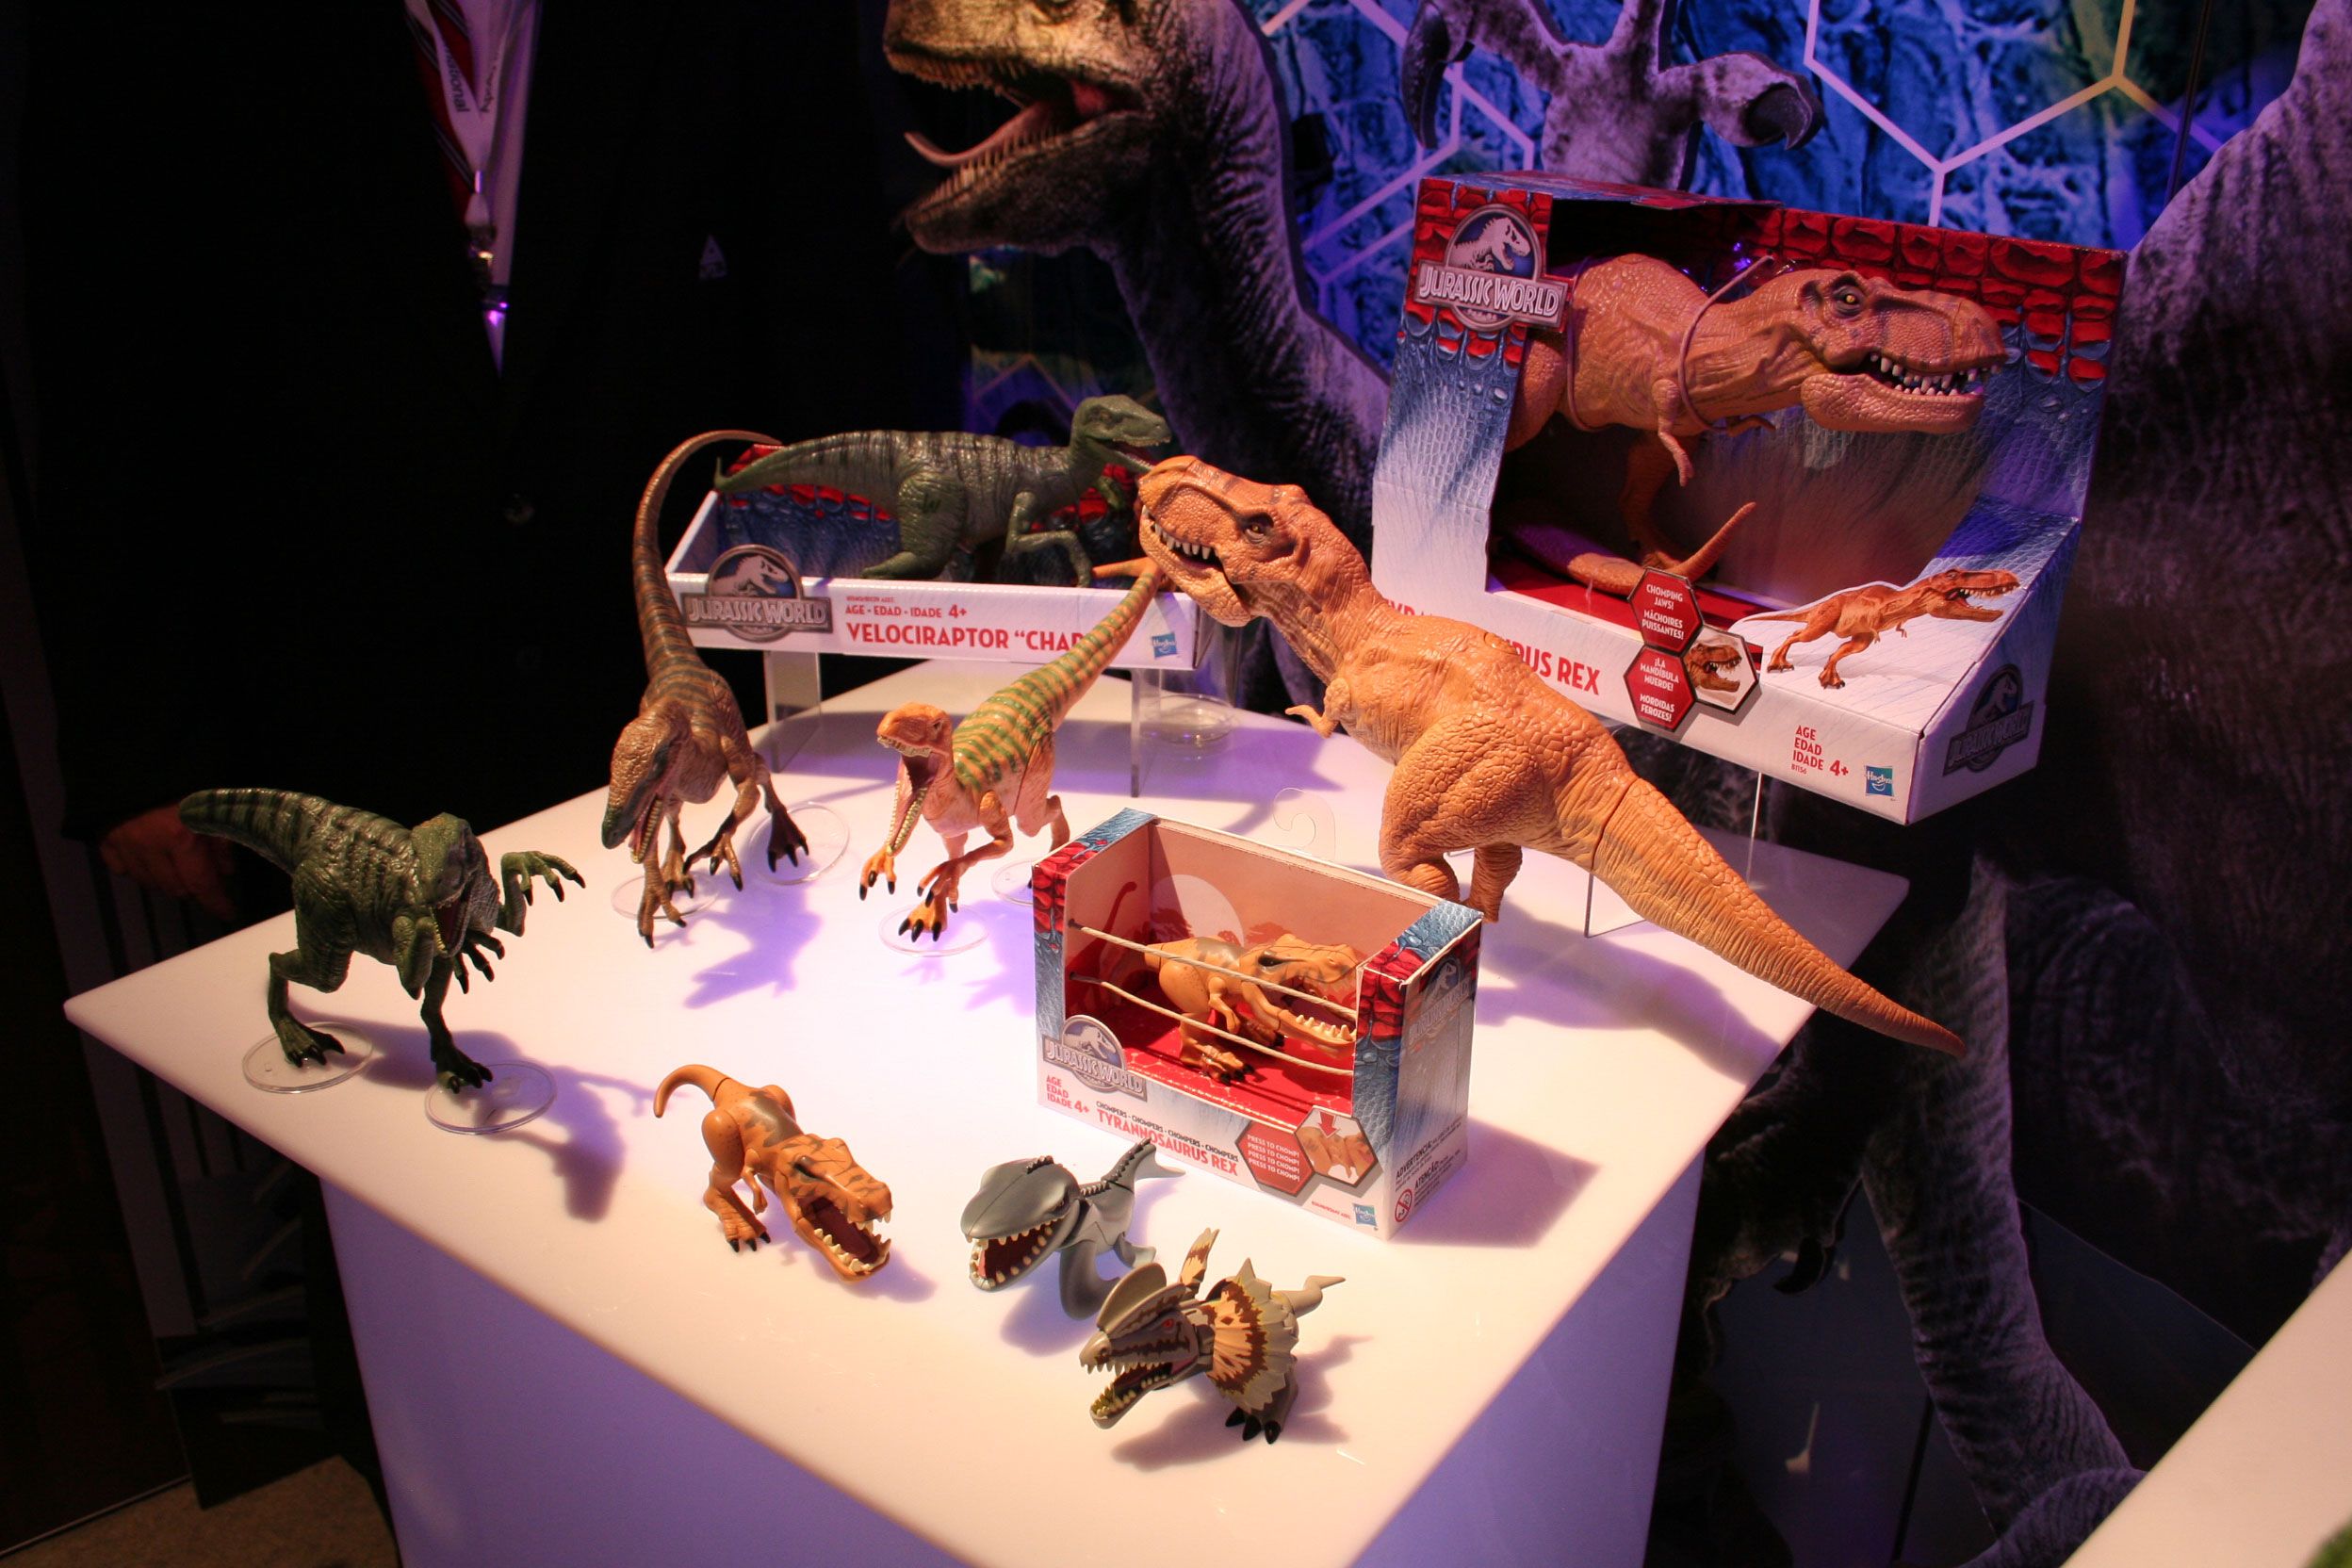 Jurassic World Toy Images from Hasbro at Toy Fair 2015